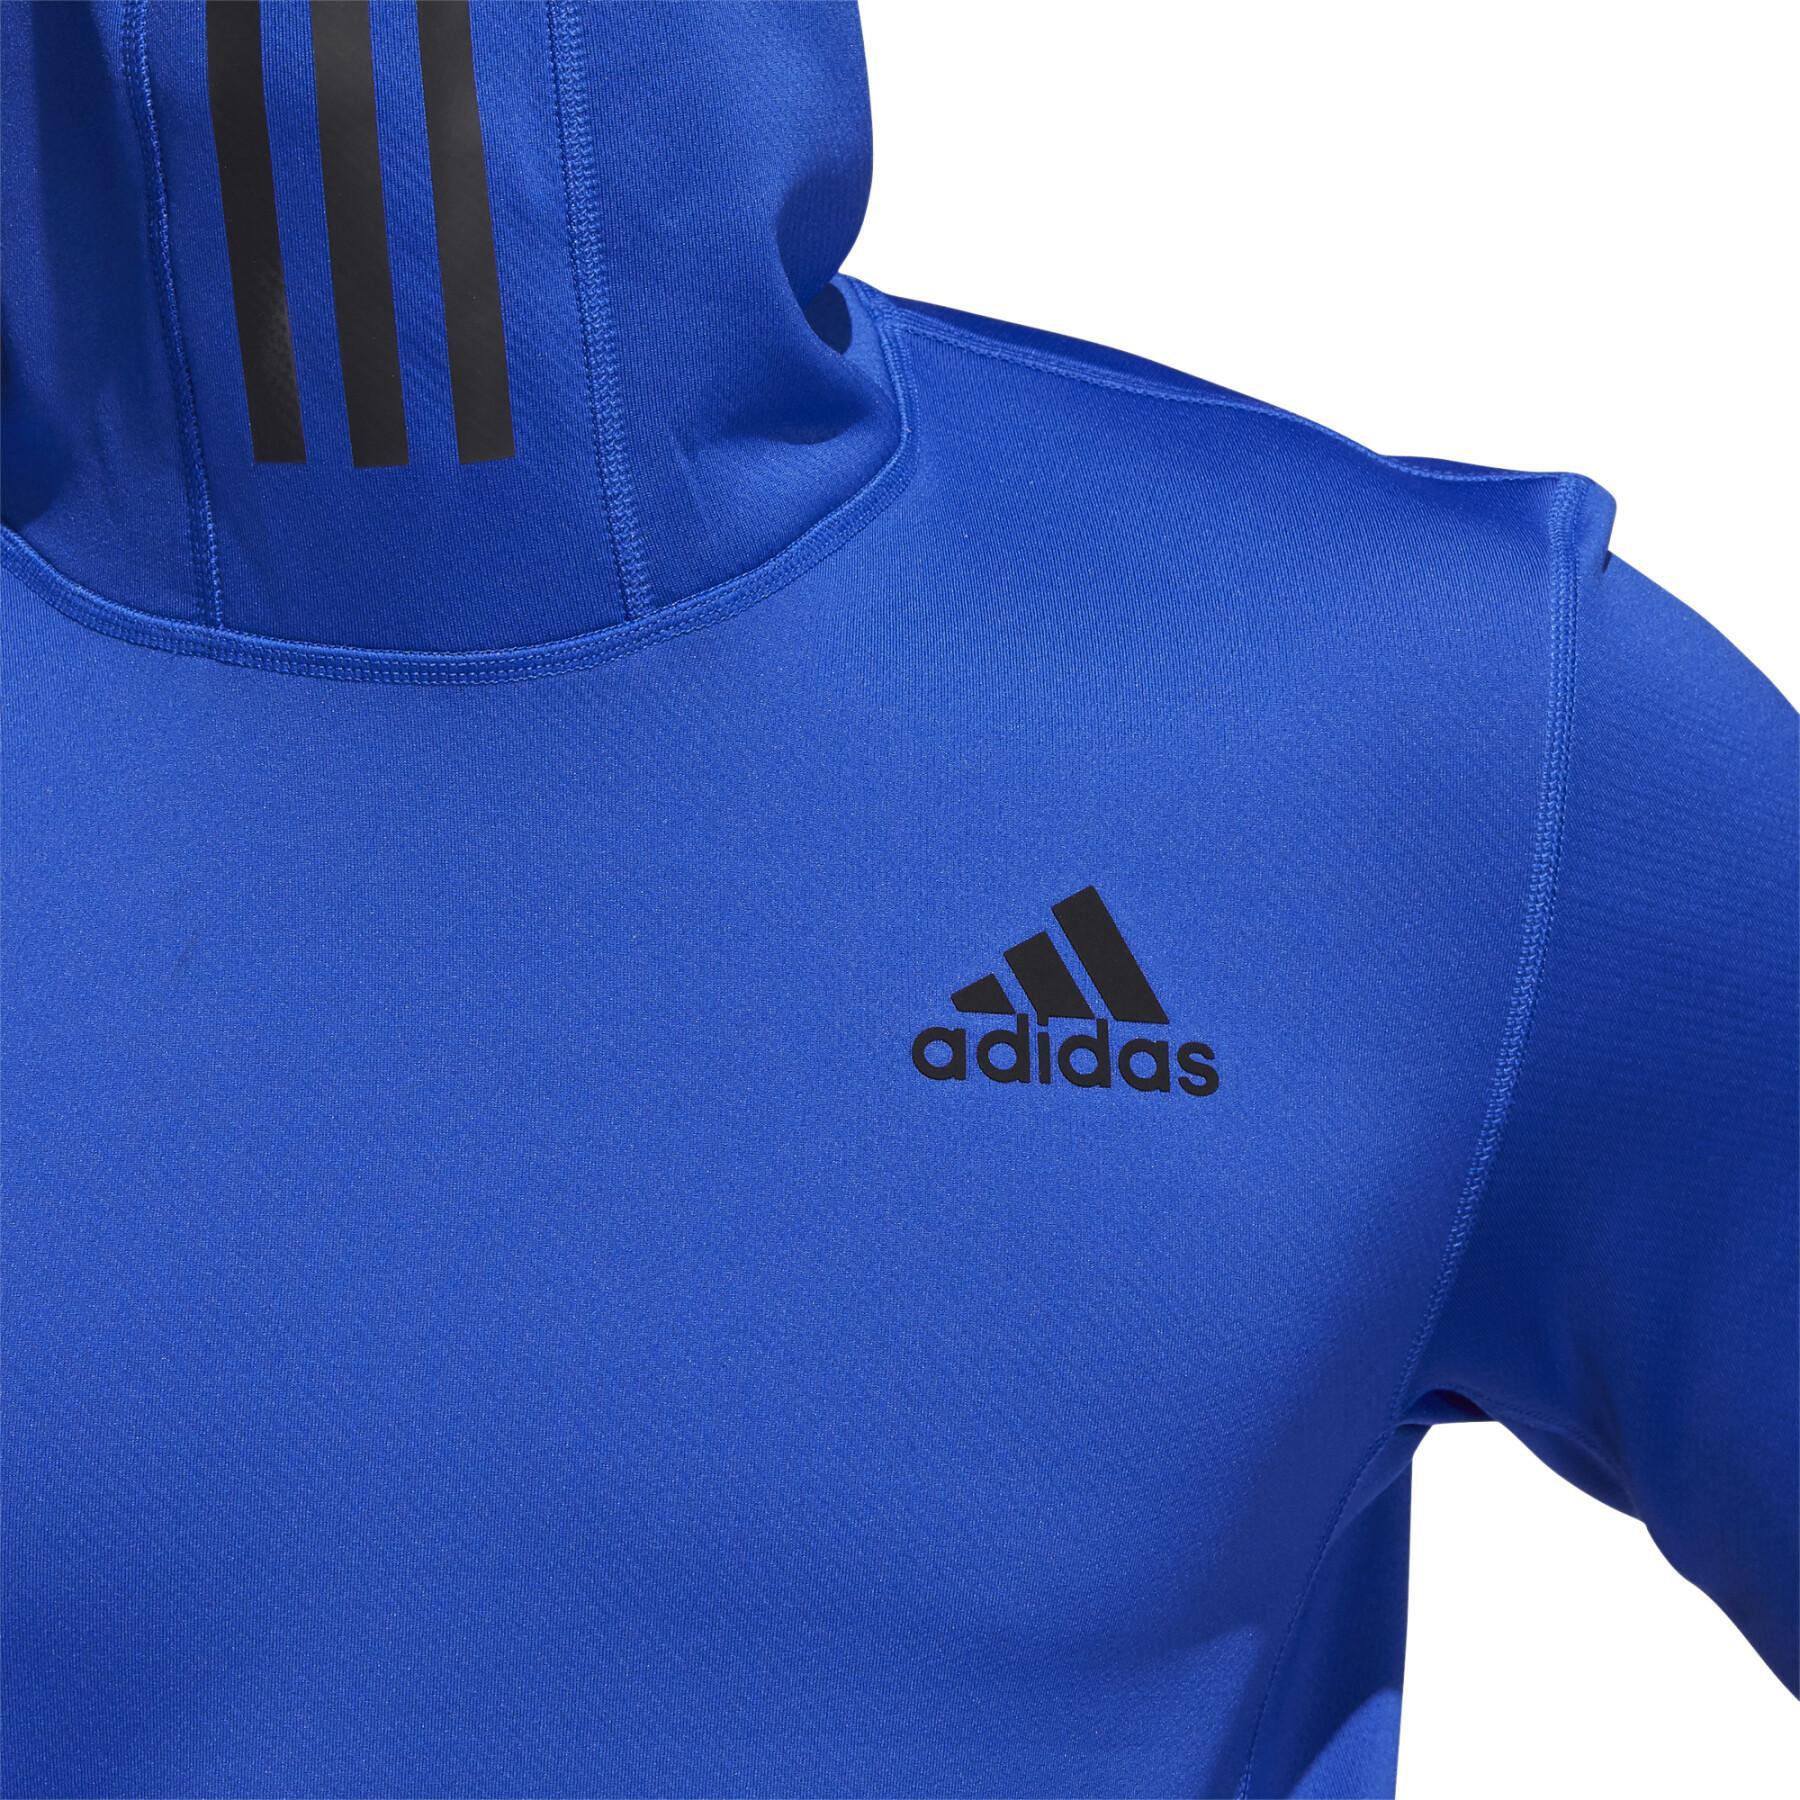 Sweatshirt à capuche adidas COLD.RDY Techfit Fitted